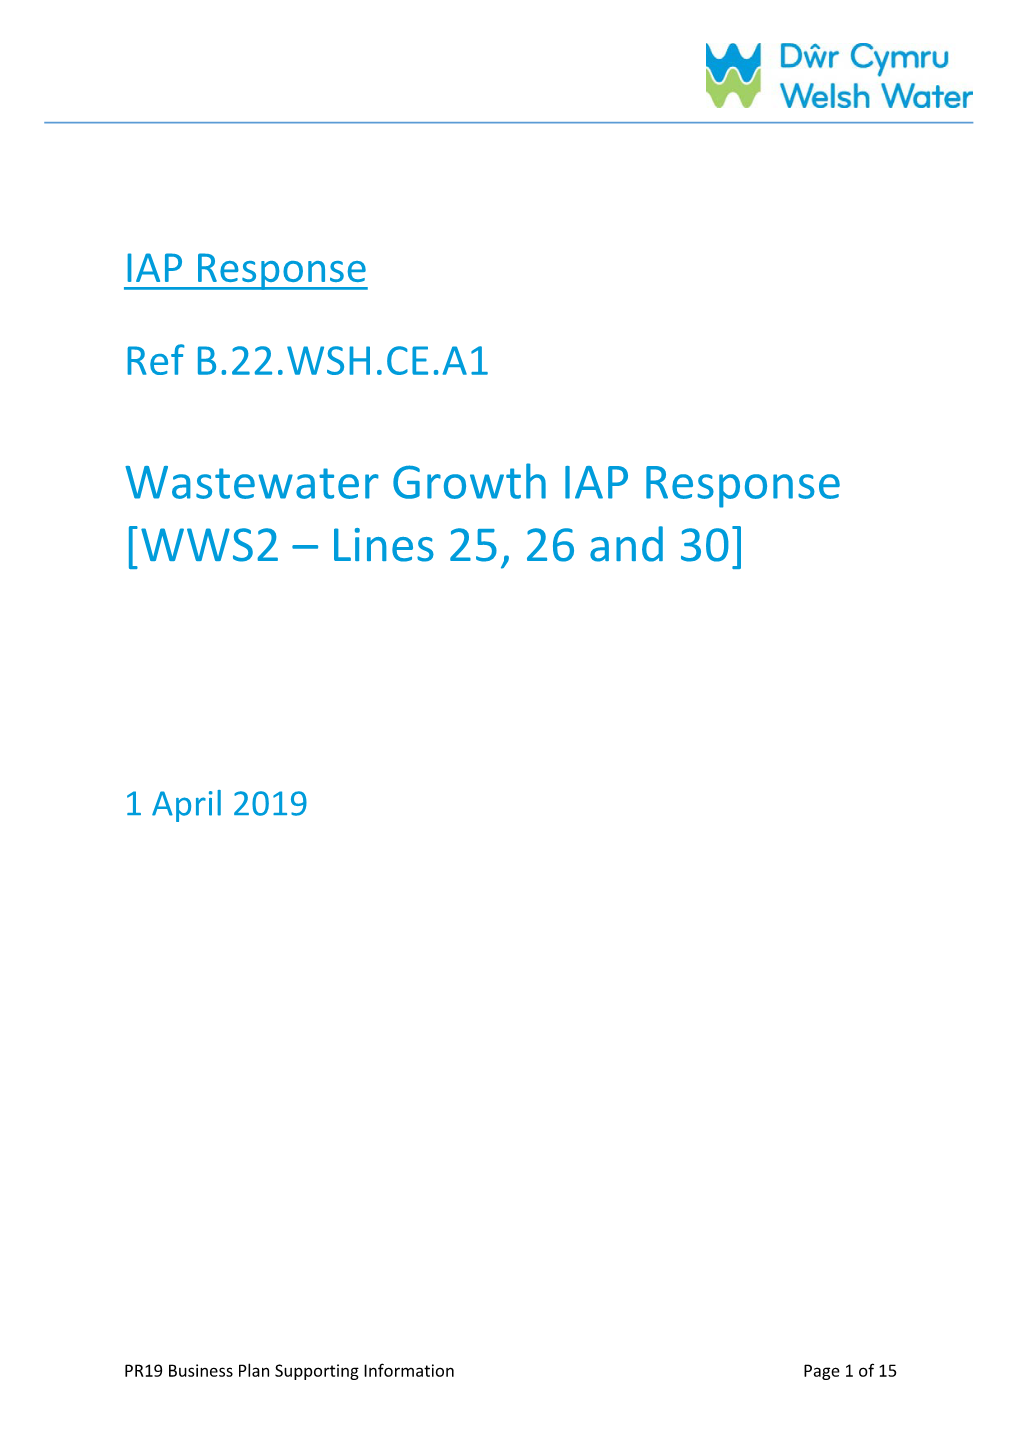 Wastewater Growth IAP Response [WWS2 – Lines 25, 26 and 30]